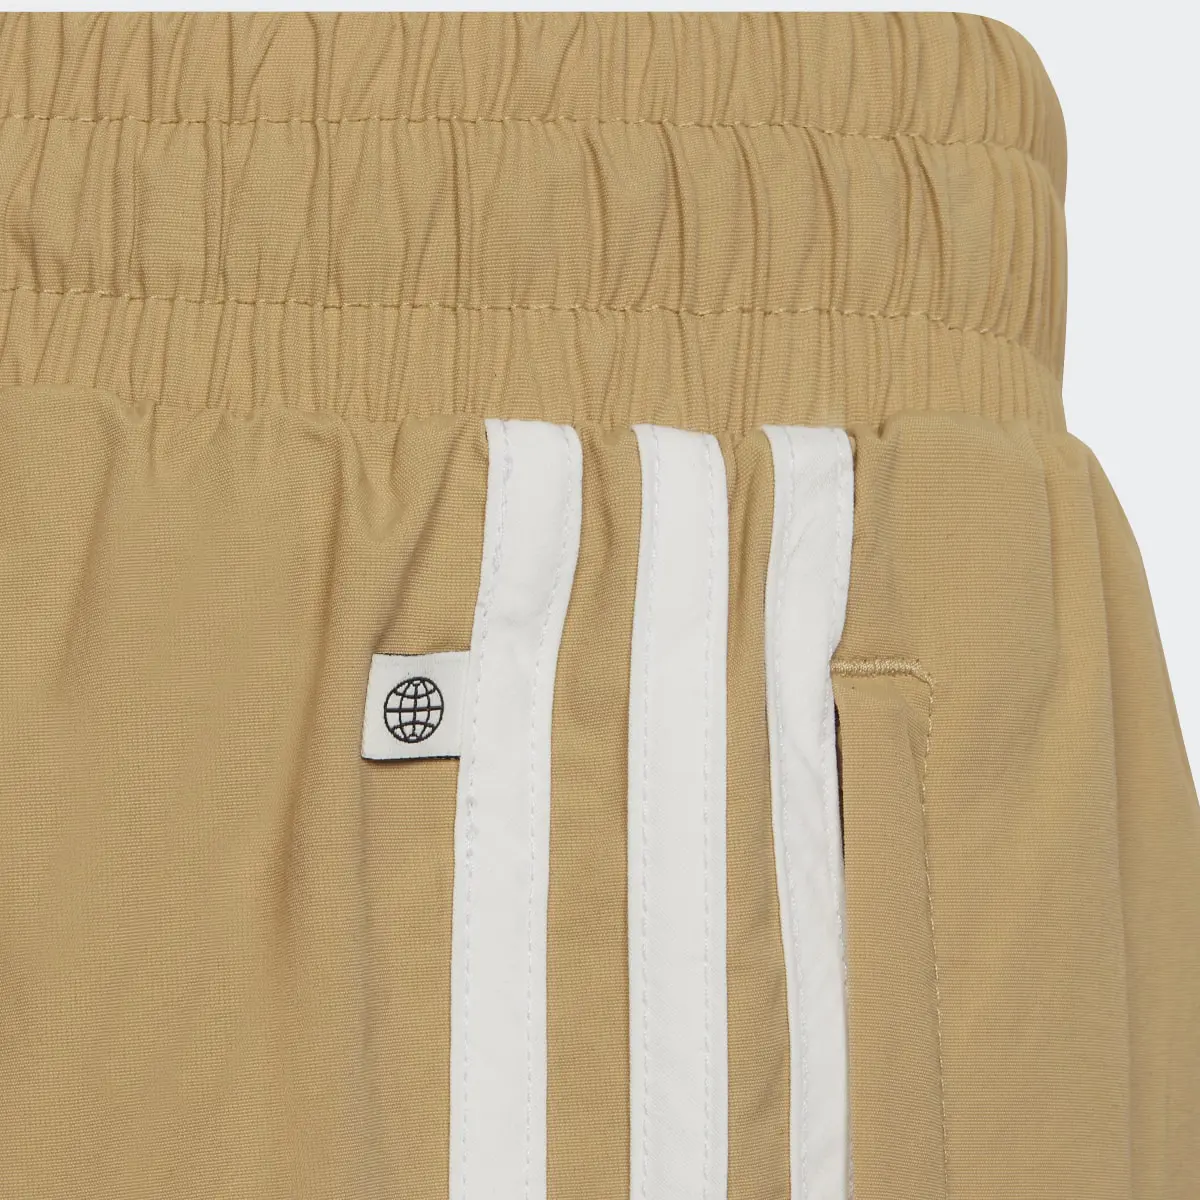 Adidas Woven Track Tracksuit Bottoms. 3